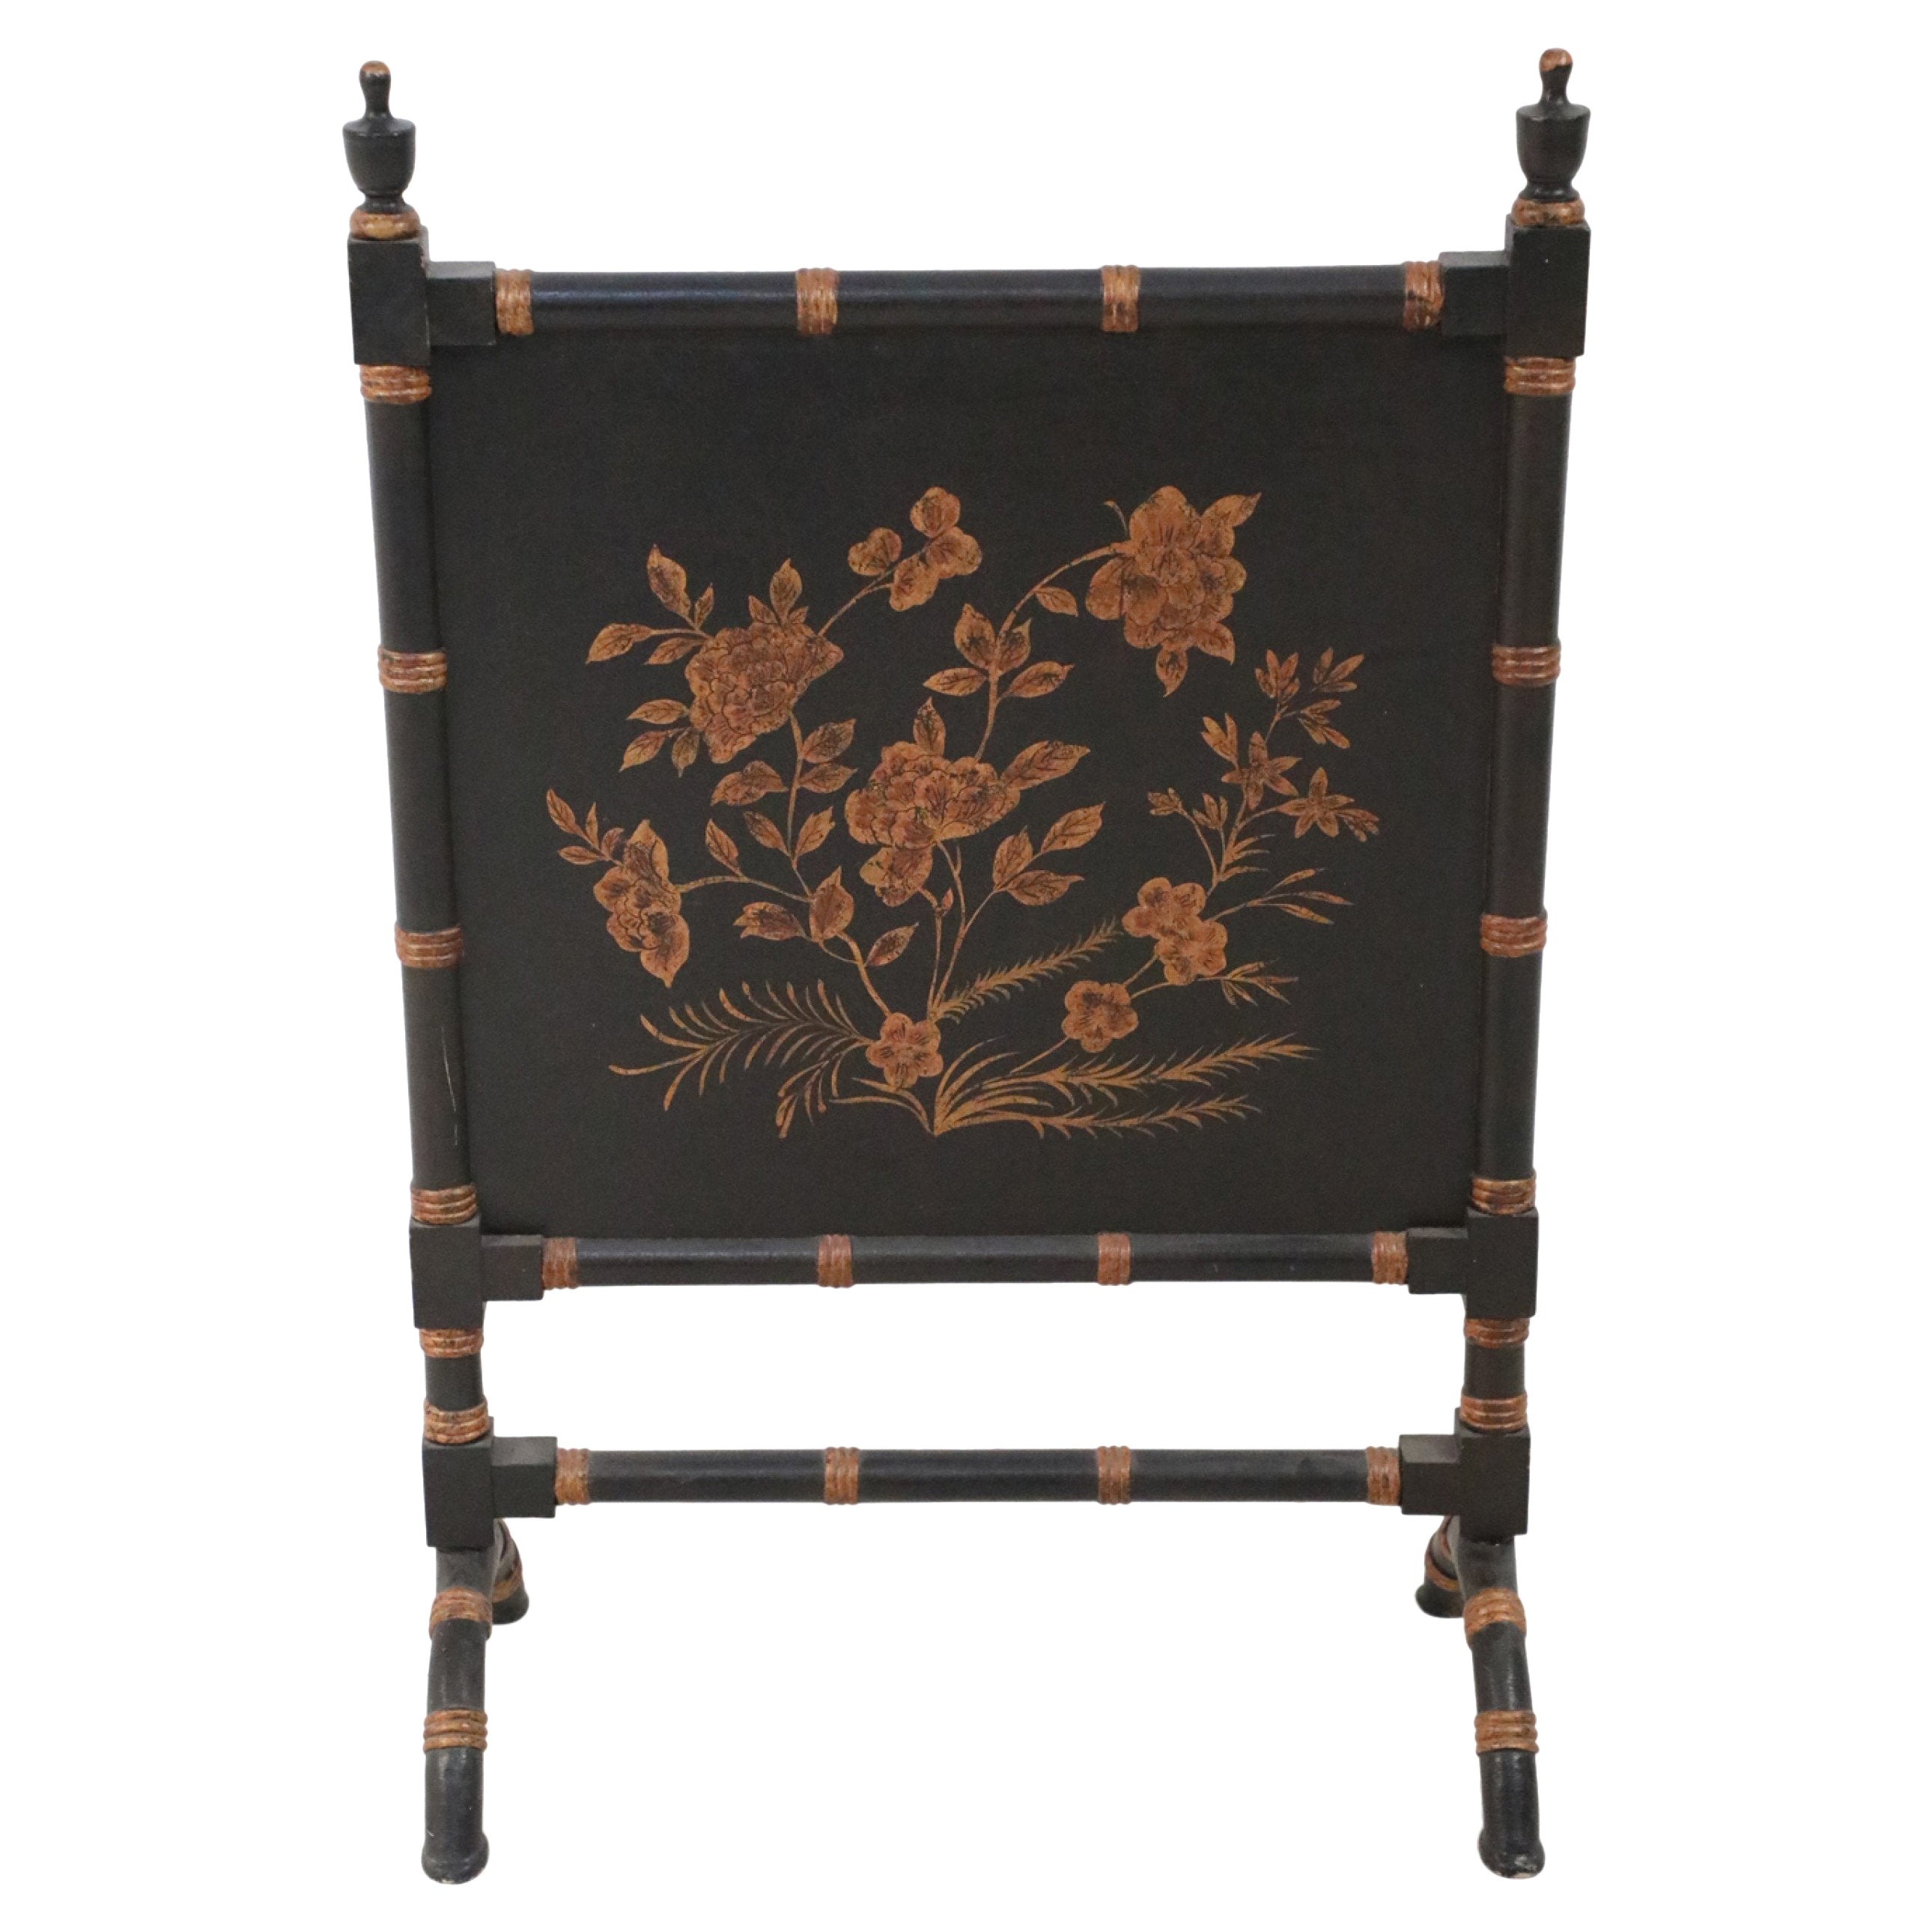 Chinese Black Painted Faux Bamboo and Gold Florals Fireplace Screen